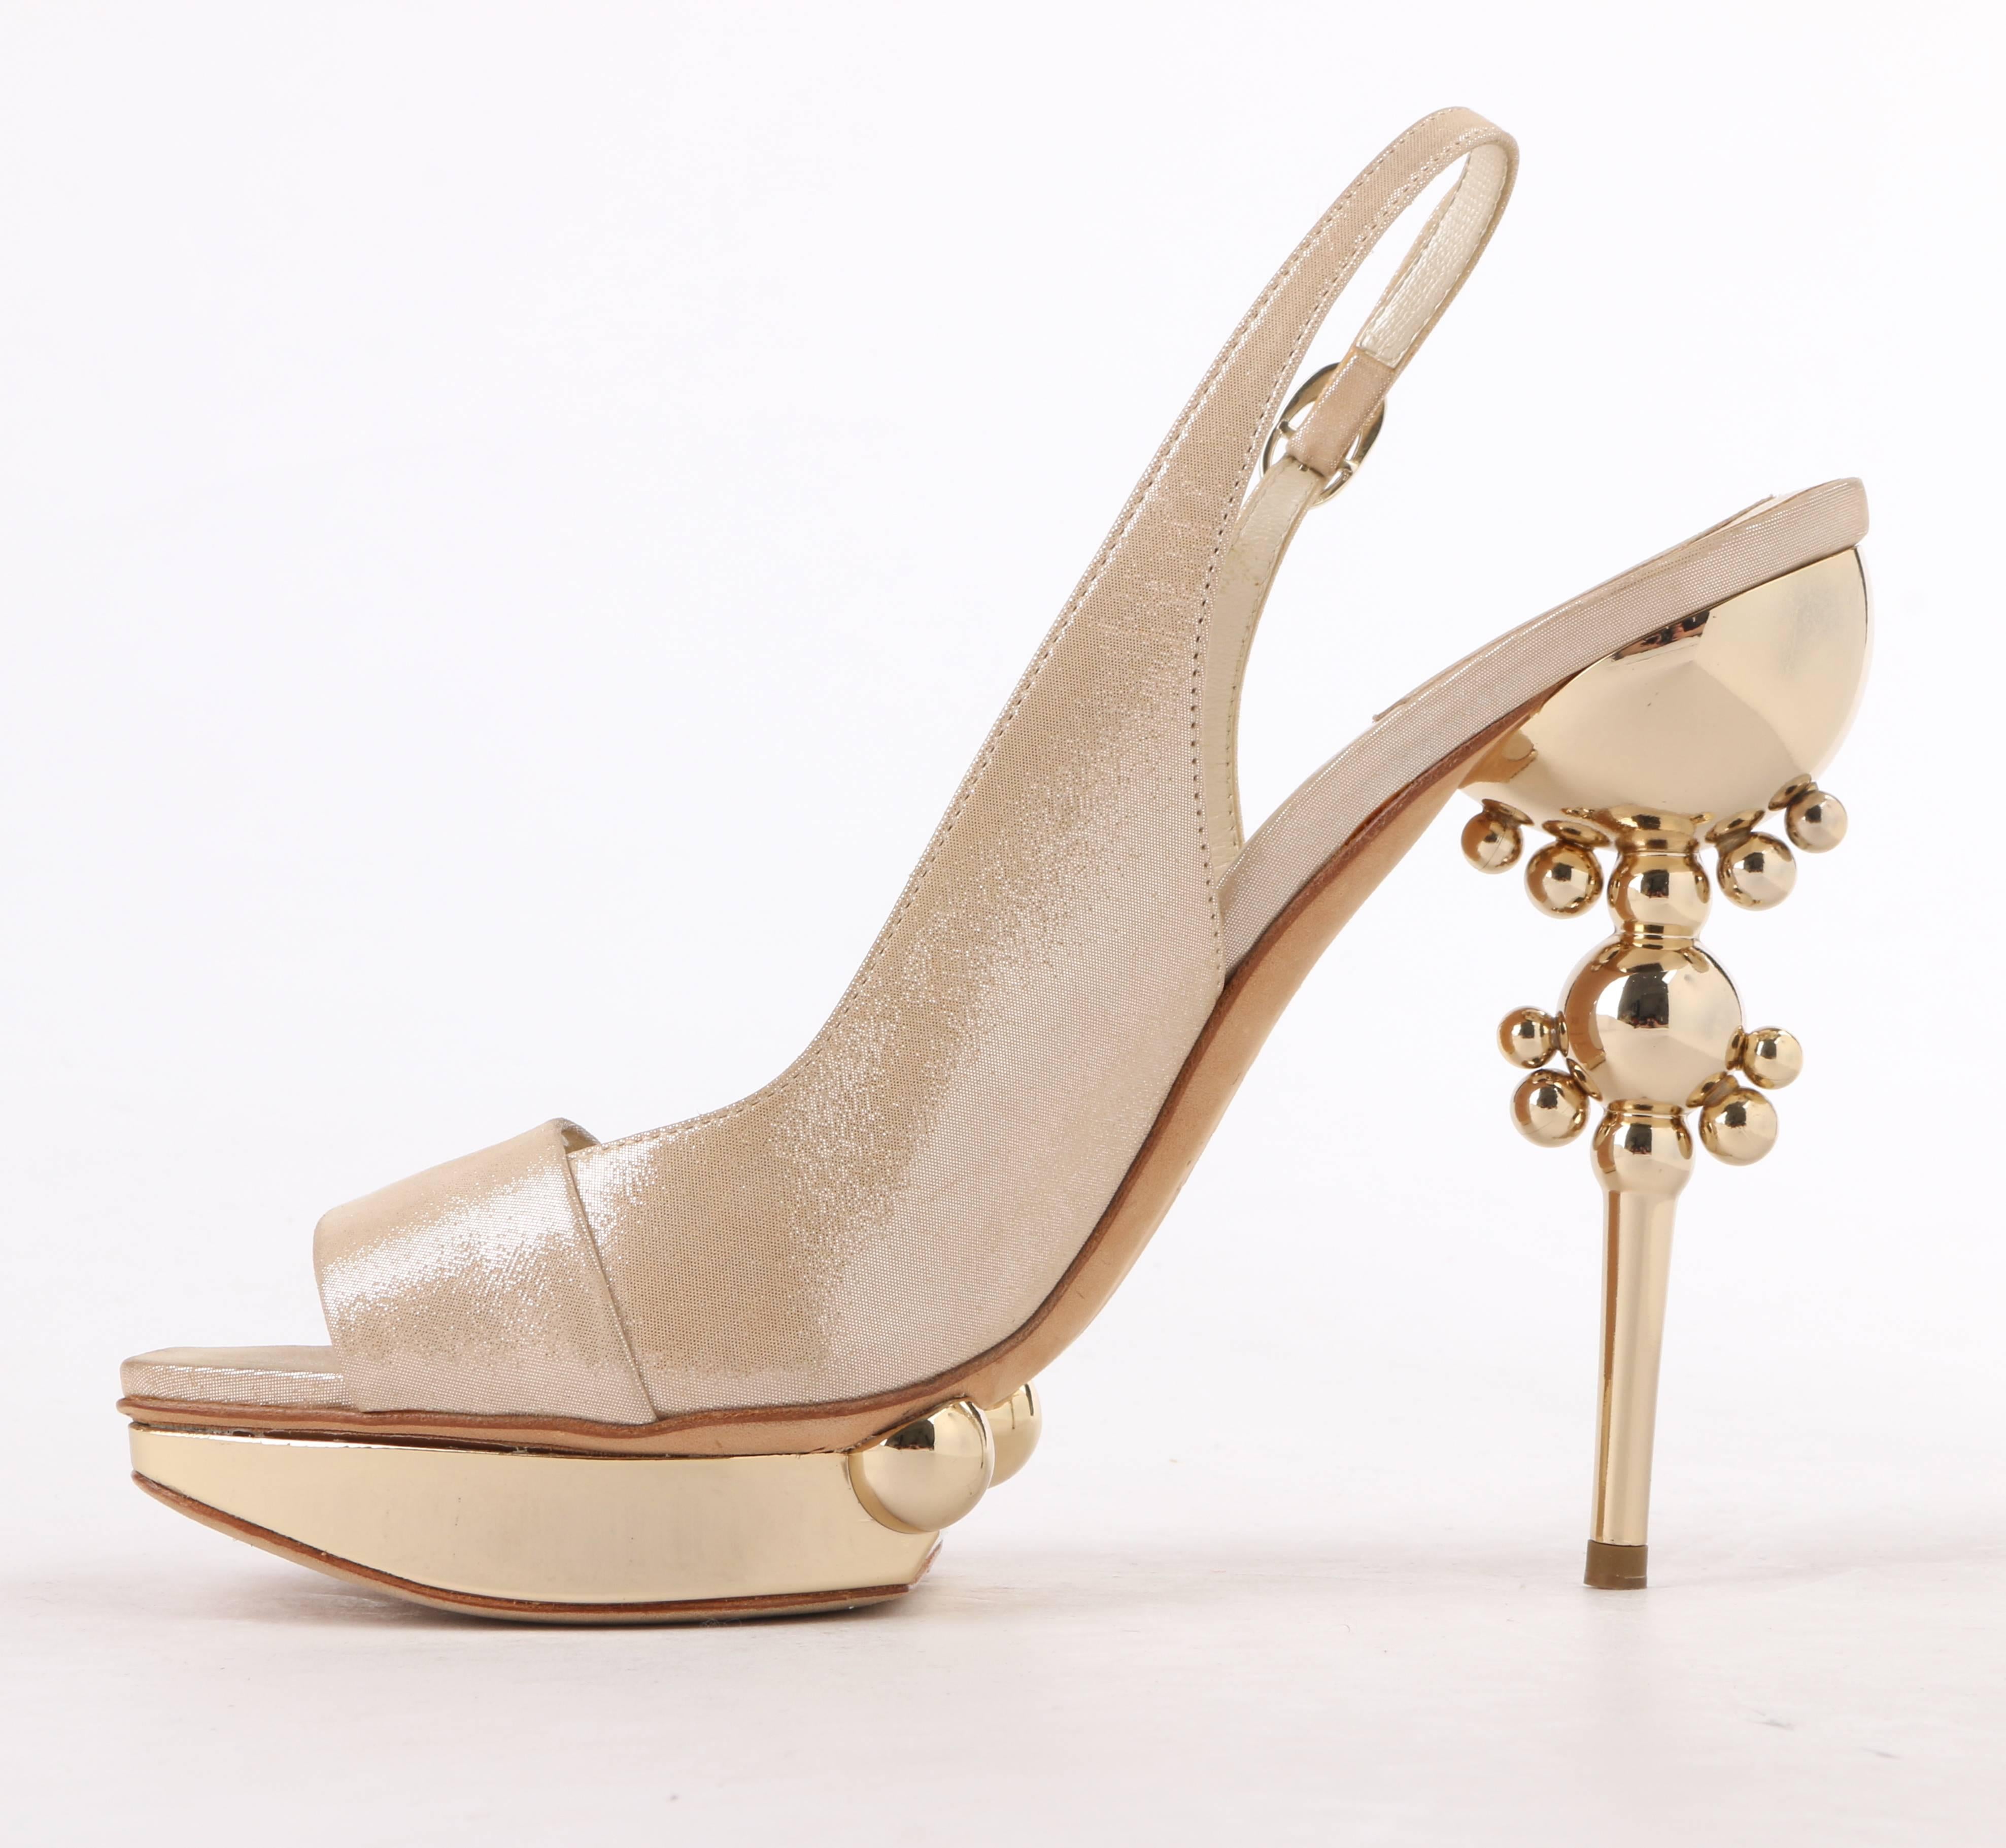 Christian Dior Resort 2008, designed by John Galliano, beige metallic suede sculpted heel platform sandals; New without box. Runway look #37. Beige metallic dot suede upper. Square peep toe. Sling back with adjustable strap and gold-toned oval